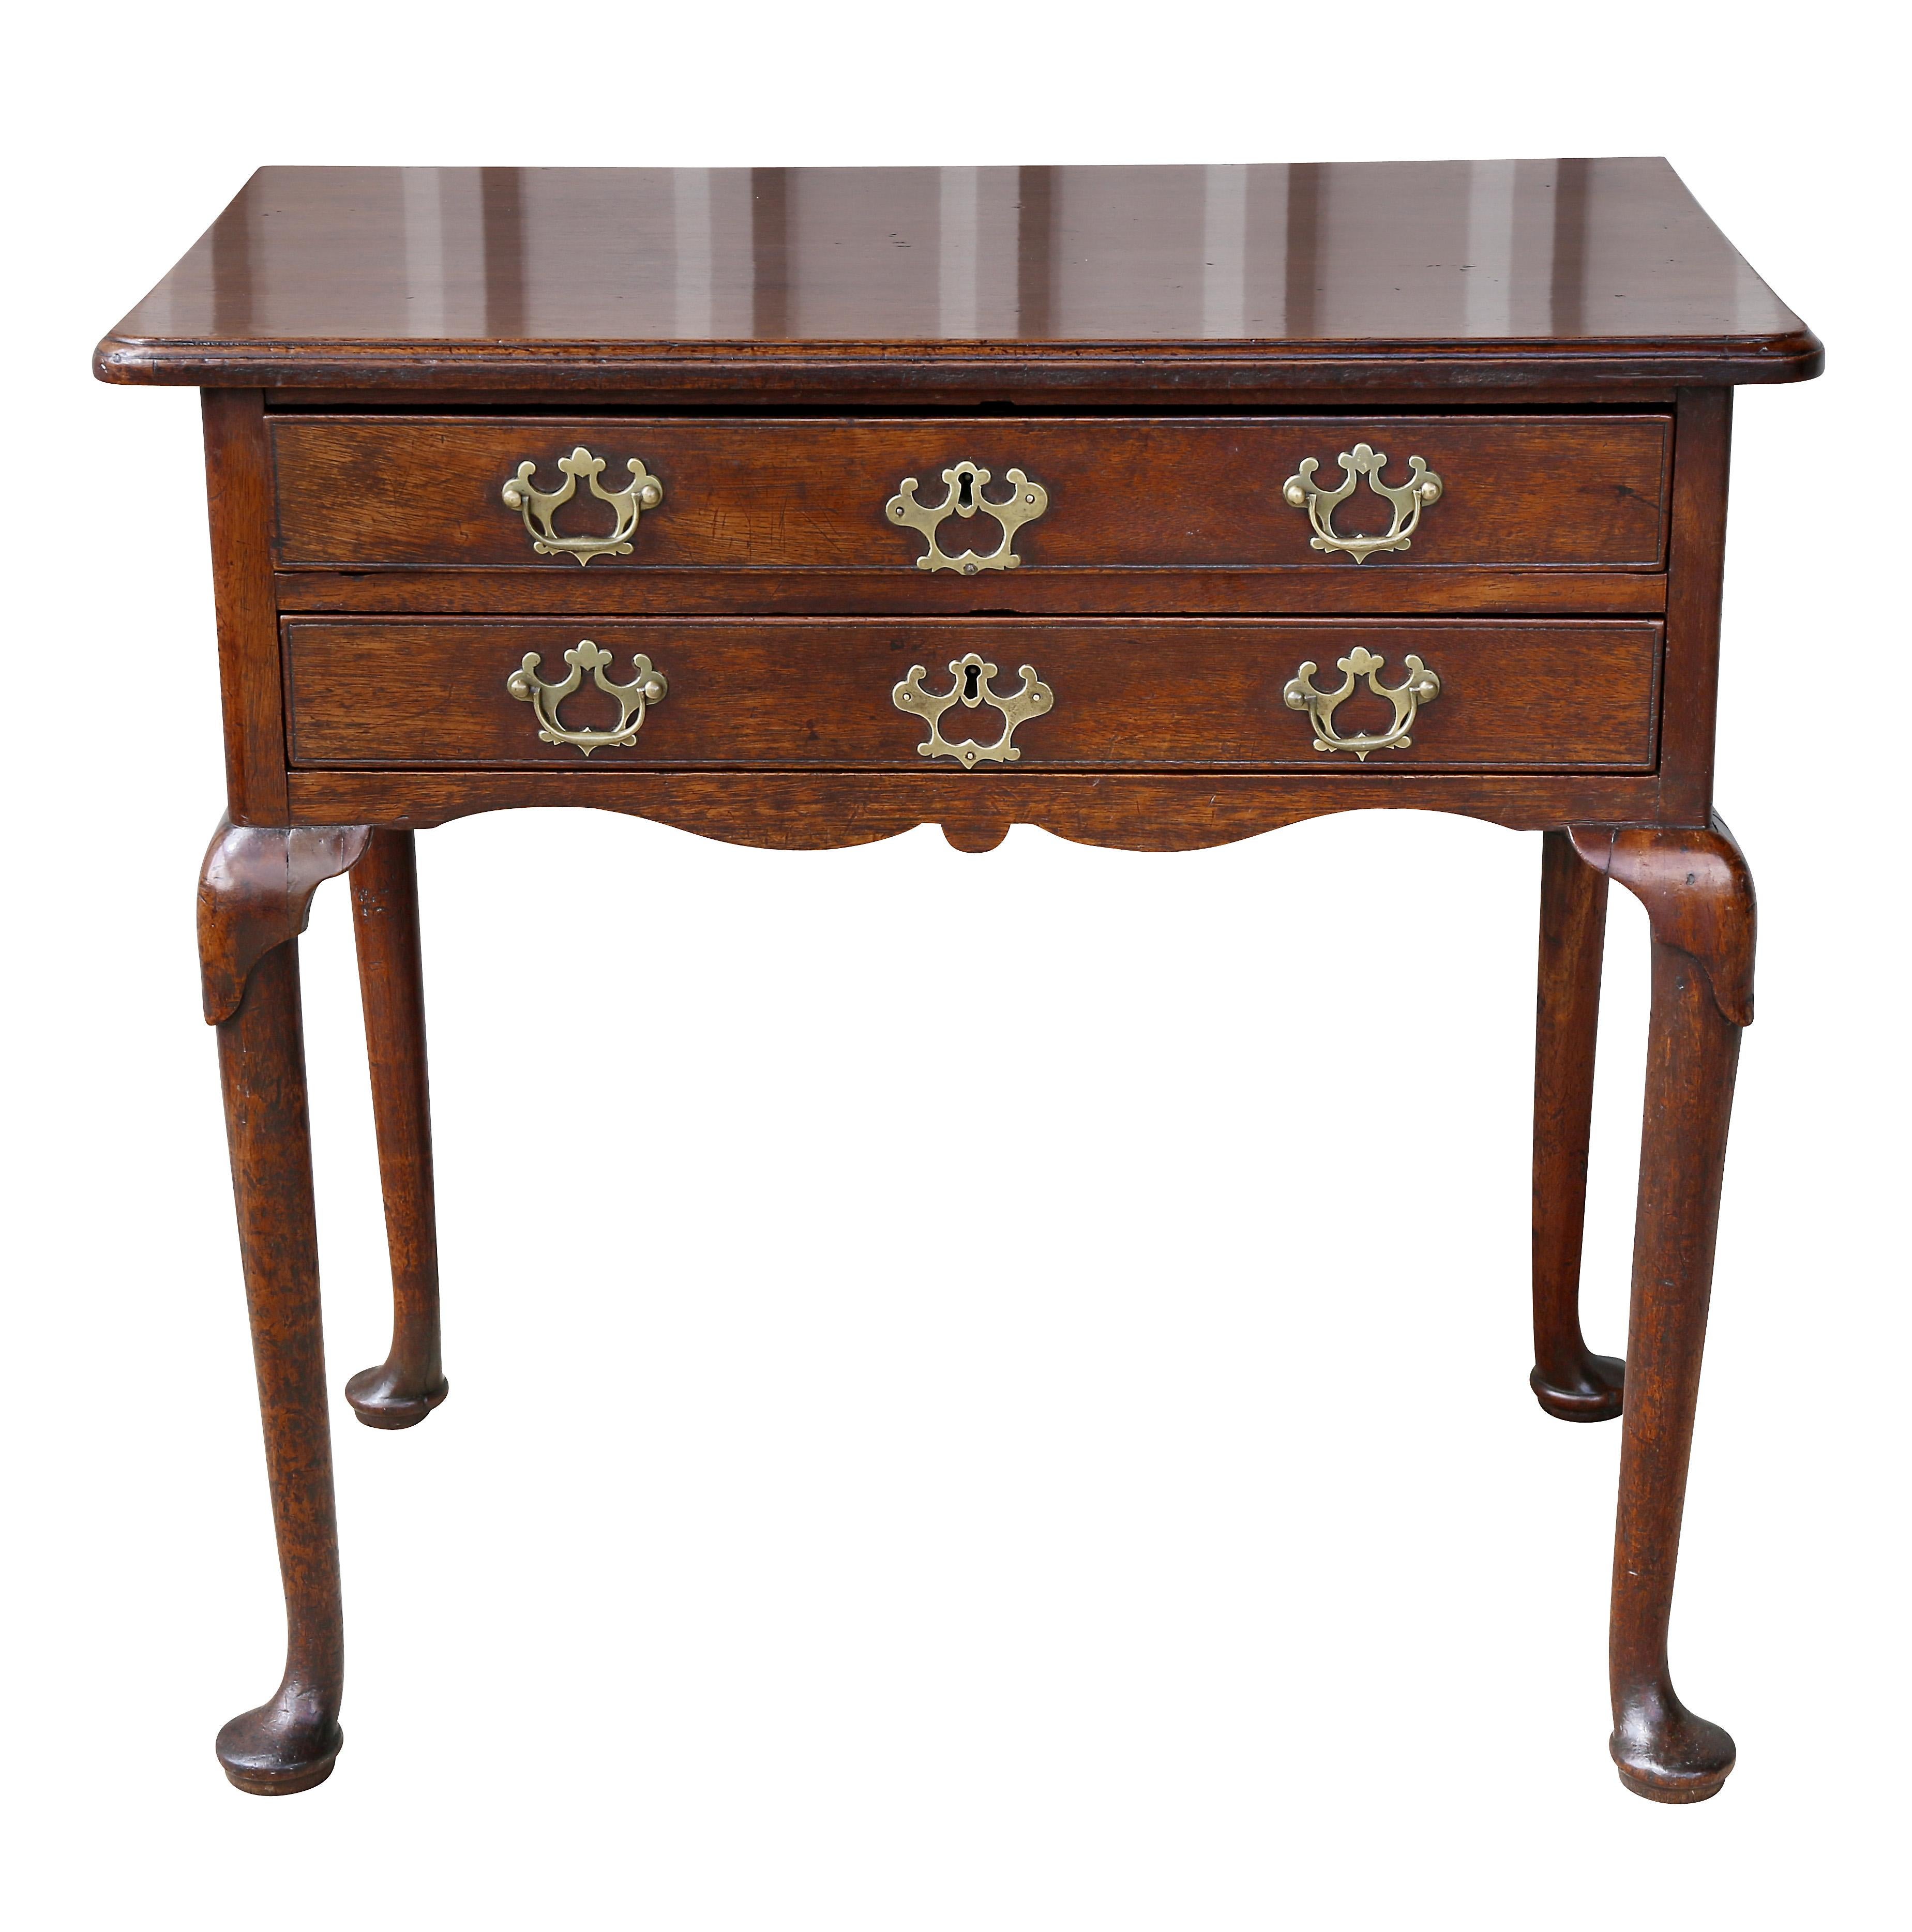 With a rectangular top over two long drawers with original handles, raised on cabriole legs and pad feet.